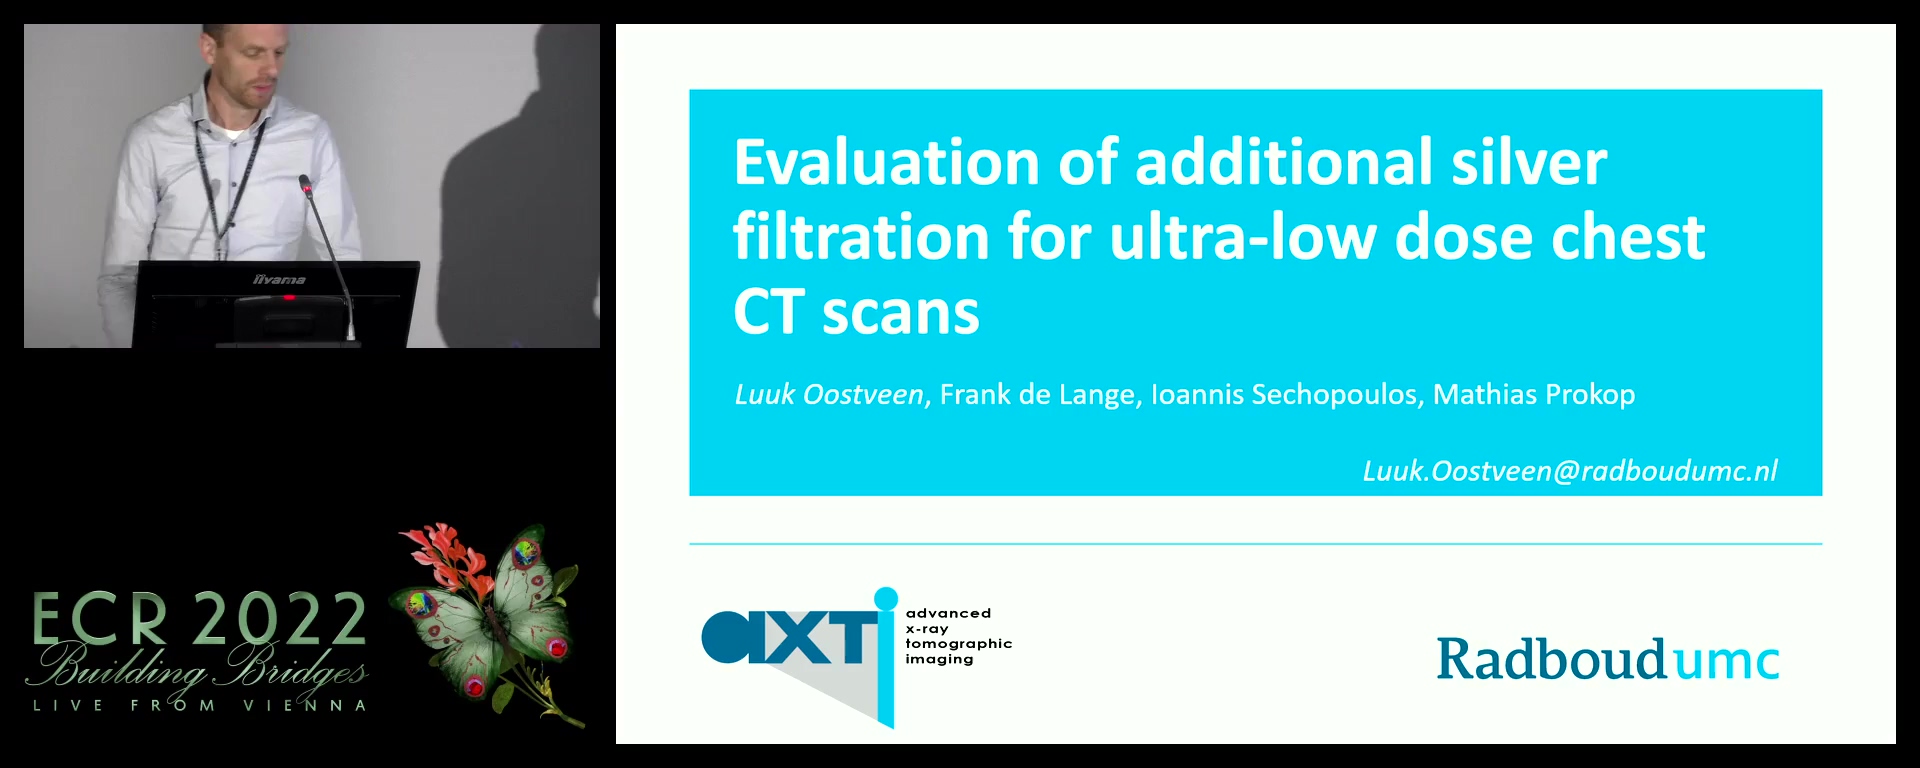 Evaluation of additional silver filtration for ultra-low dose chest CT scans - Luuk J. Oostveen, Nijmegen / NL